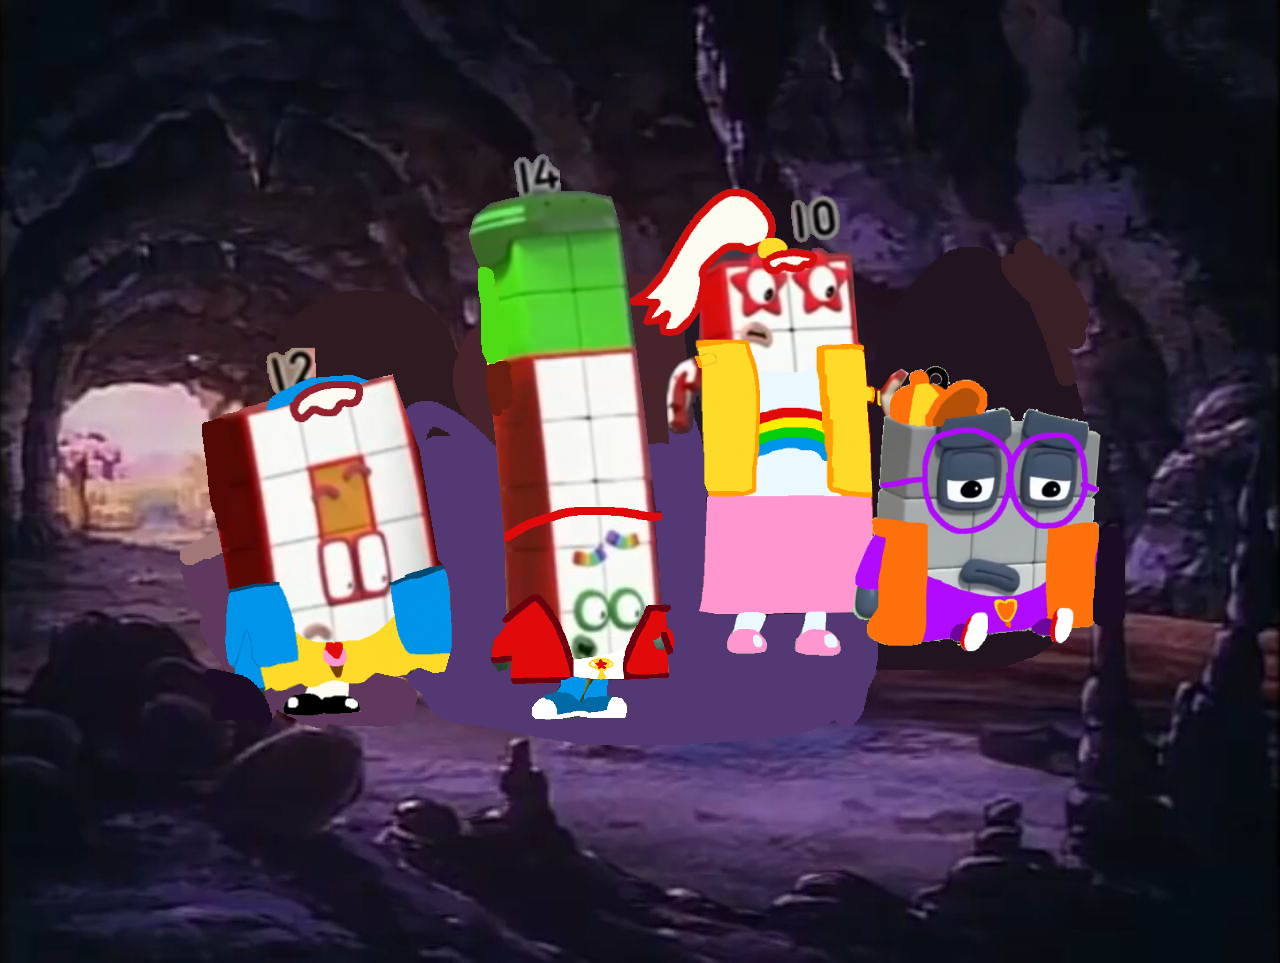 Numberblocks 1-10 in their Pajamas by alexiscurry on DeviantArt